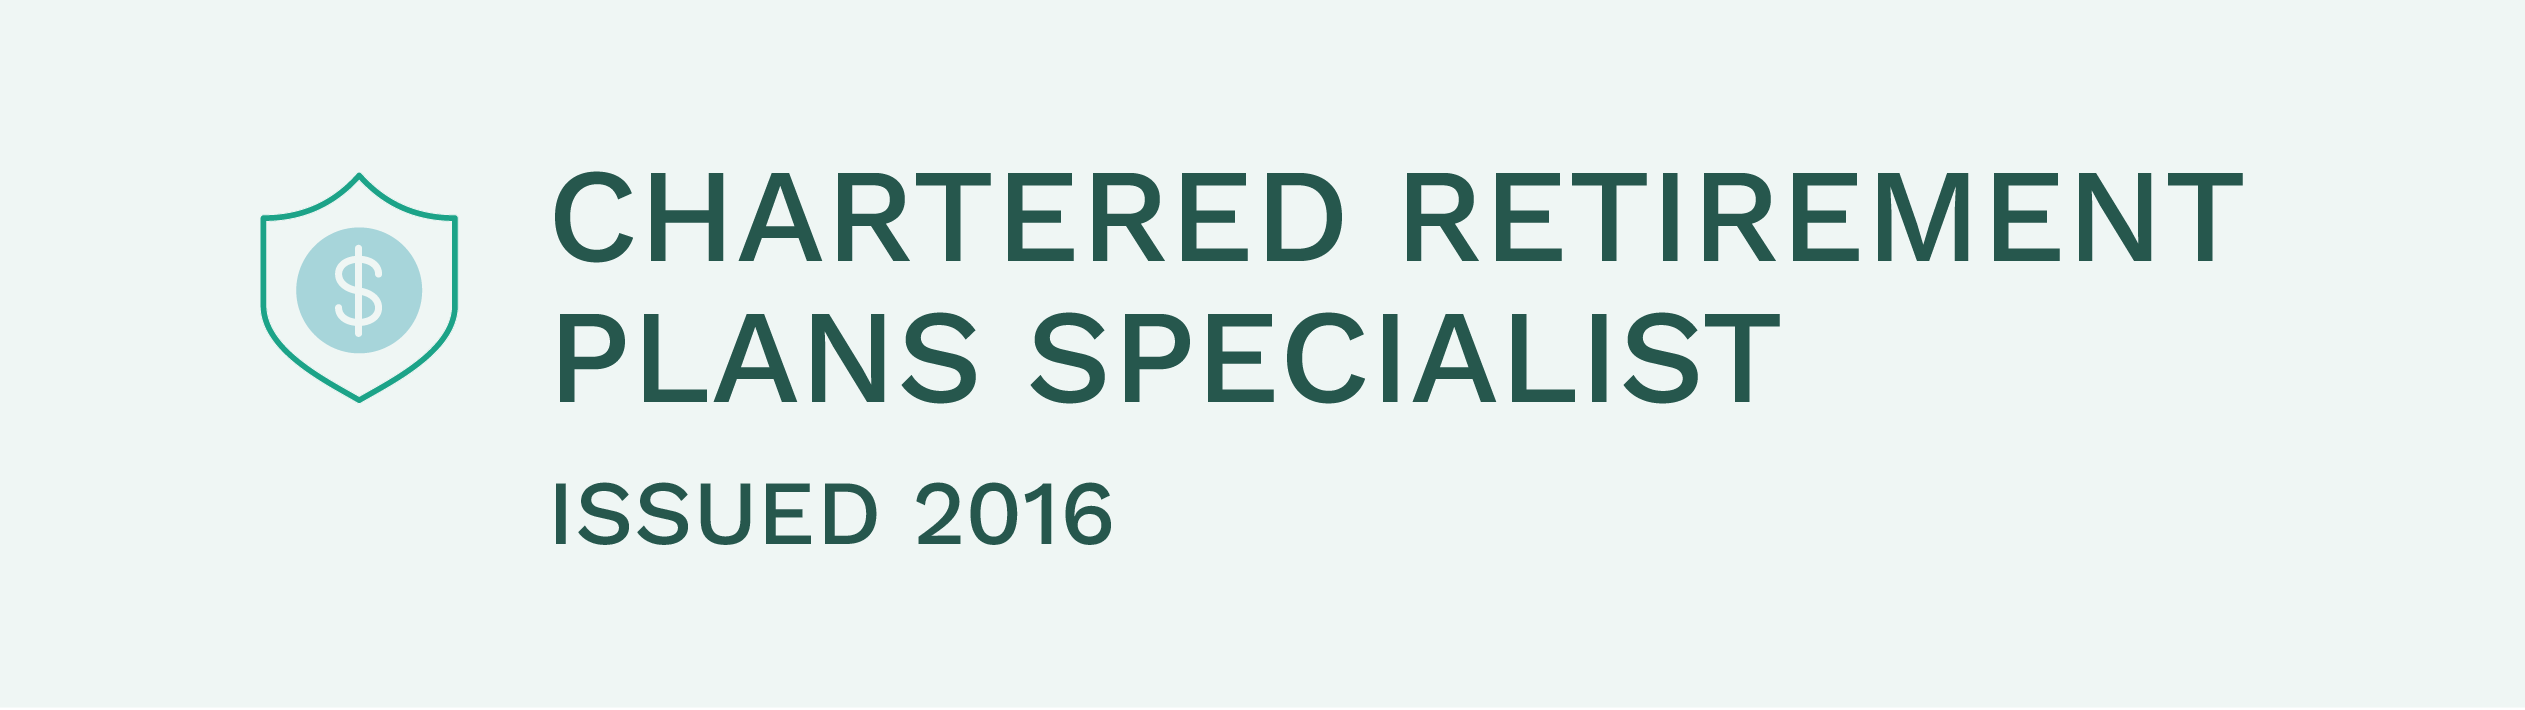 Chartered Retirement Plans Specialist 2016